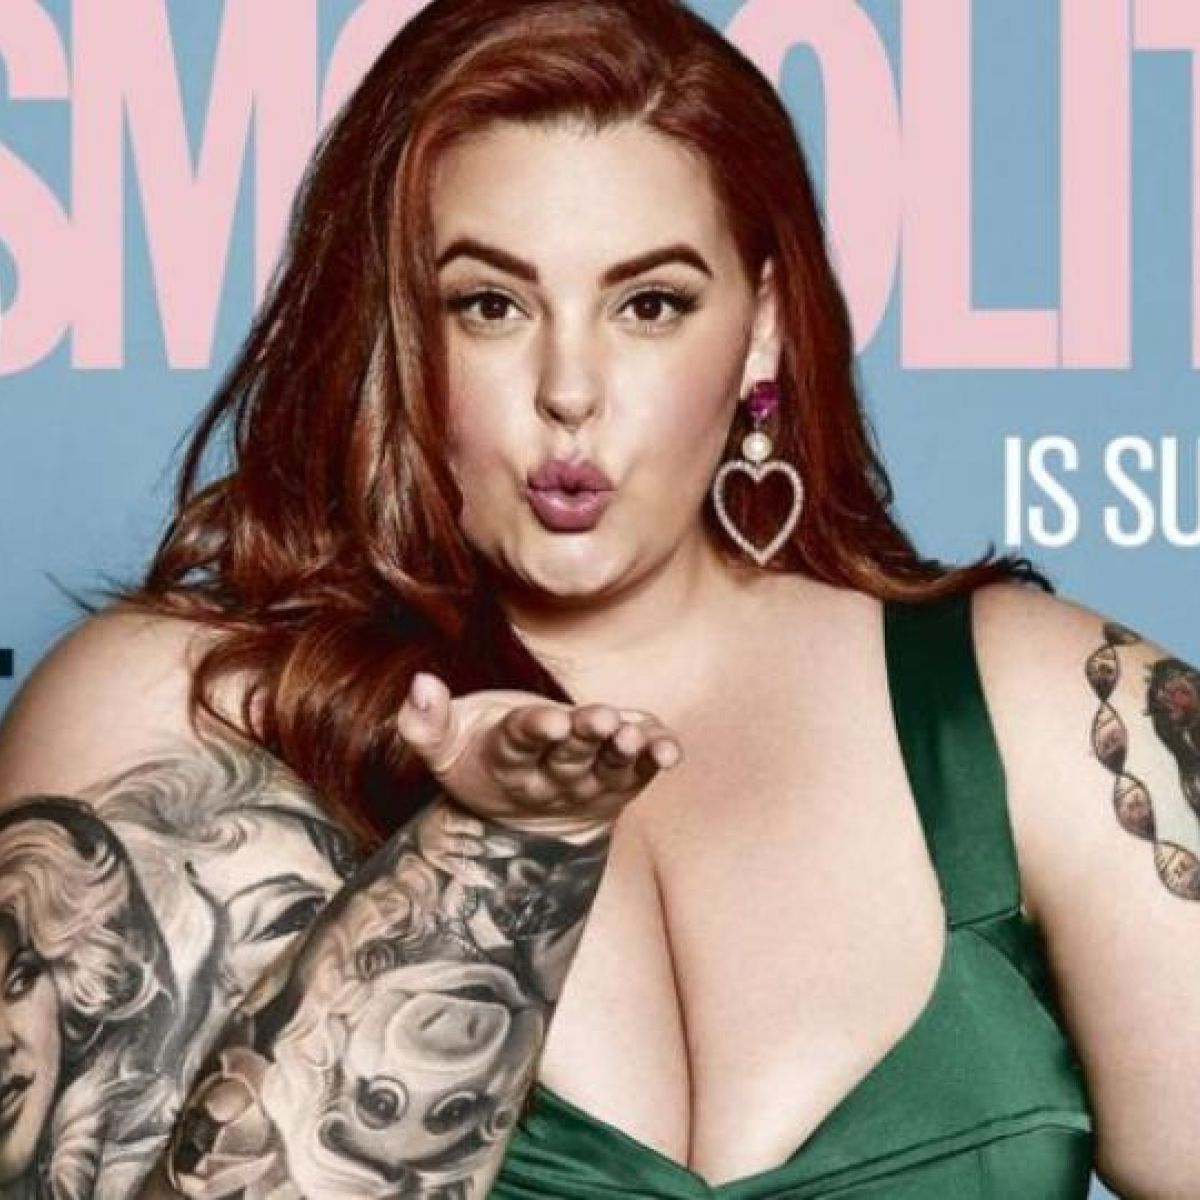 Fat Chick Happy New Year - Cosmopolitan magazine cover criticised for 'promoting obesity'